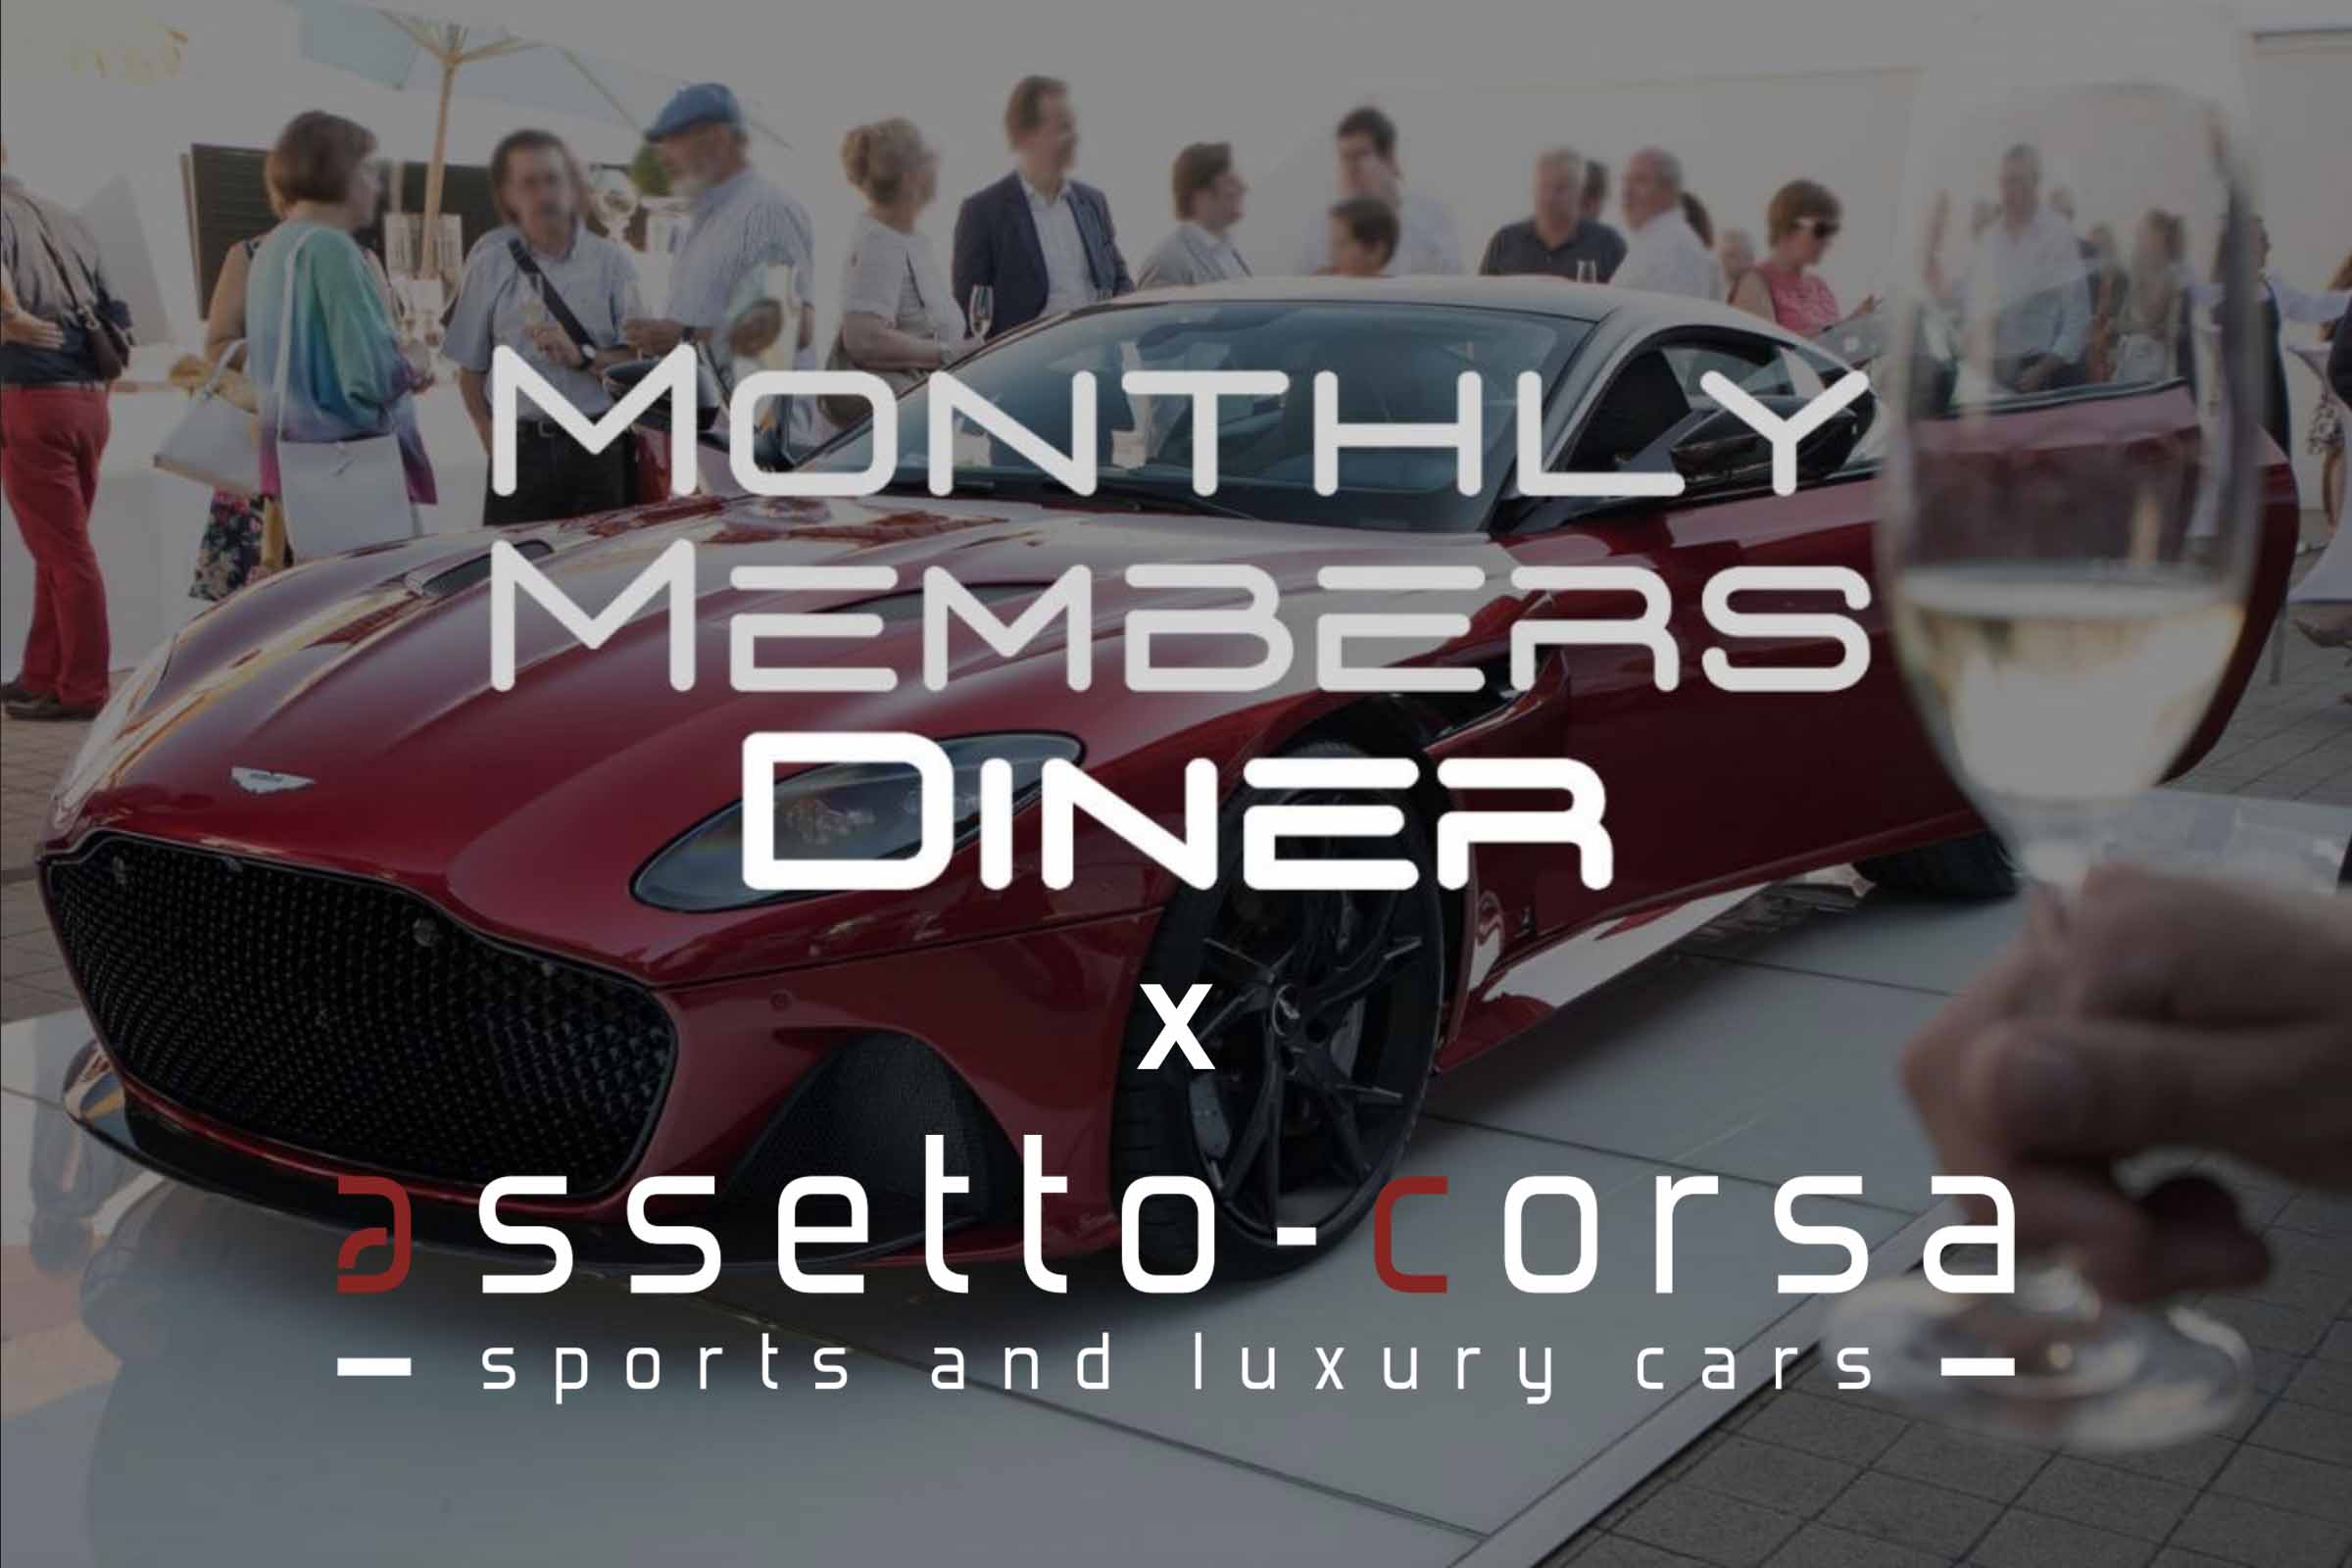 Monthly Members goes Assetto-Corsa